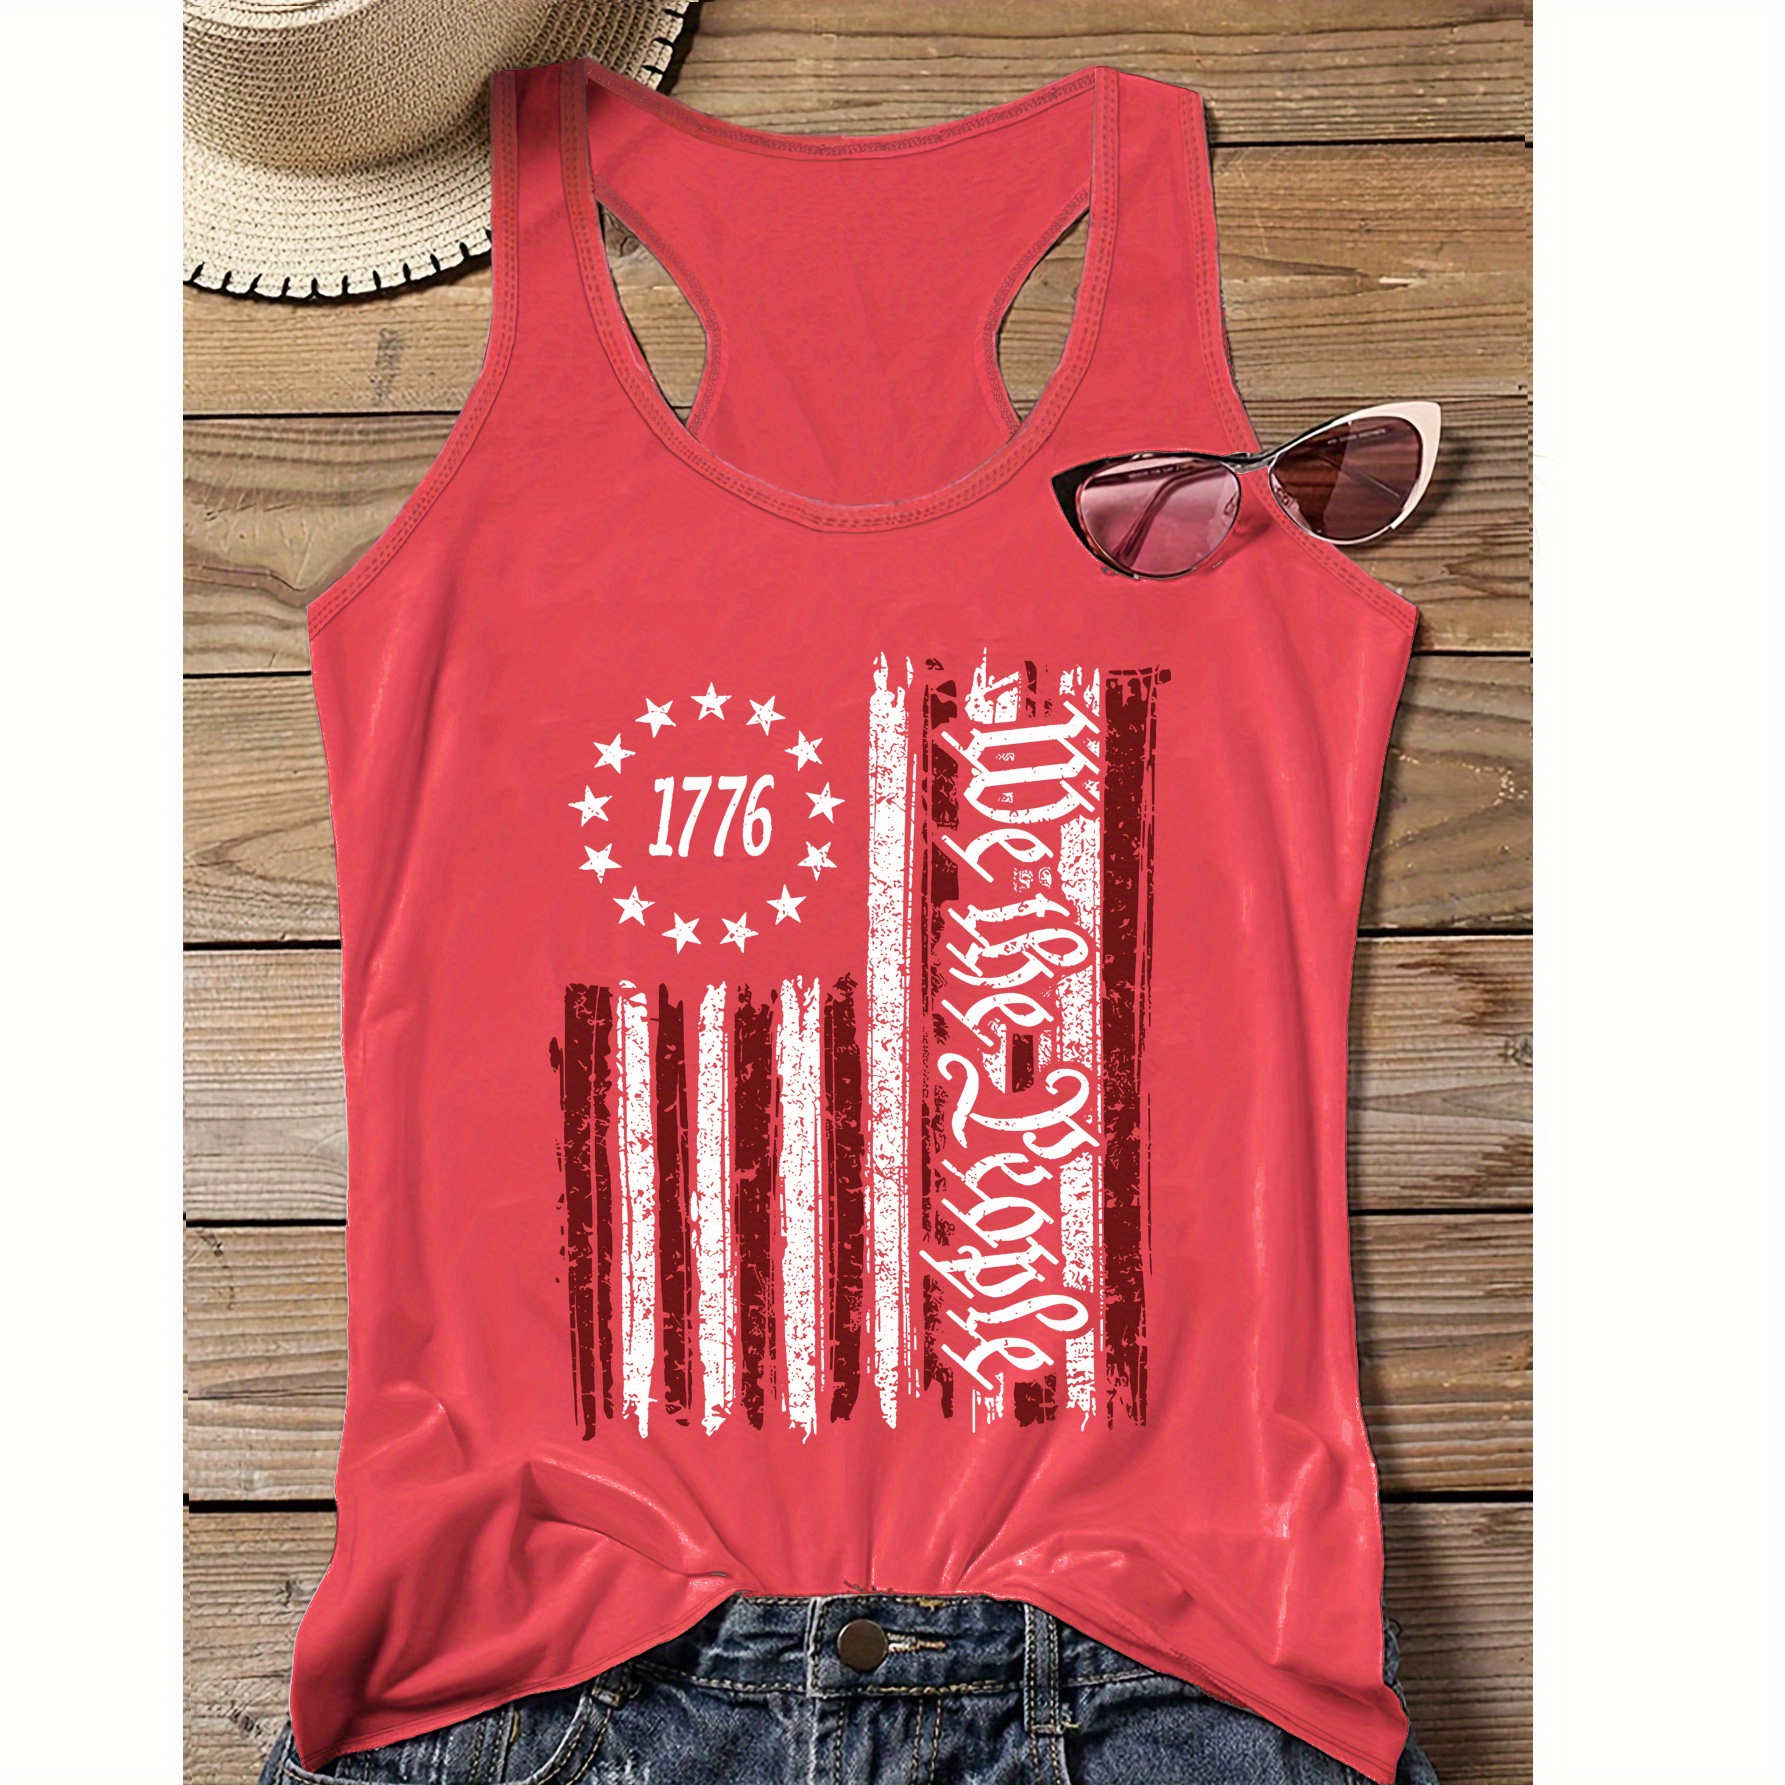 

Plus Size Casual Sporty 1776 American Flag Print Independence Day 4th Of July Tank Top, Sleeveless Racer Back Casual Top For Summer & Spring, Women's Clothing